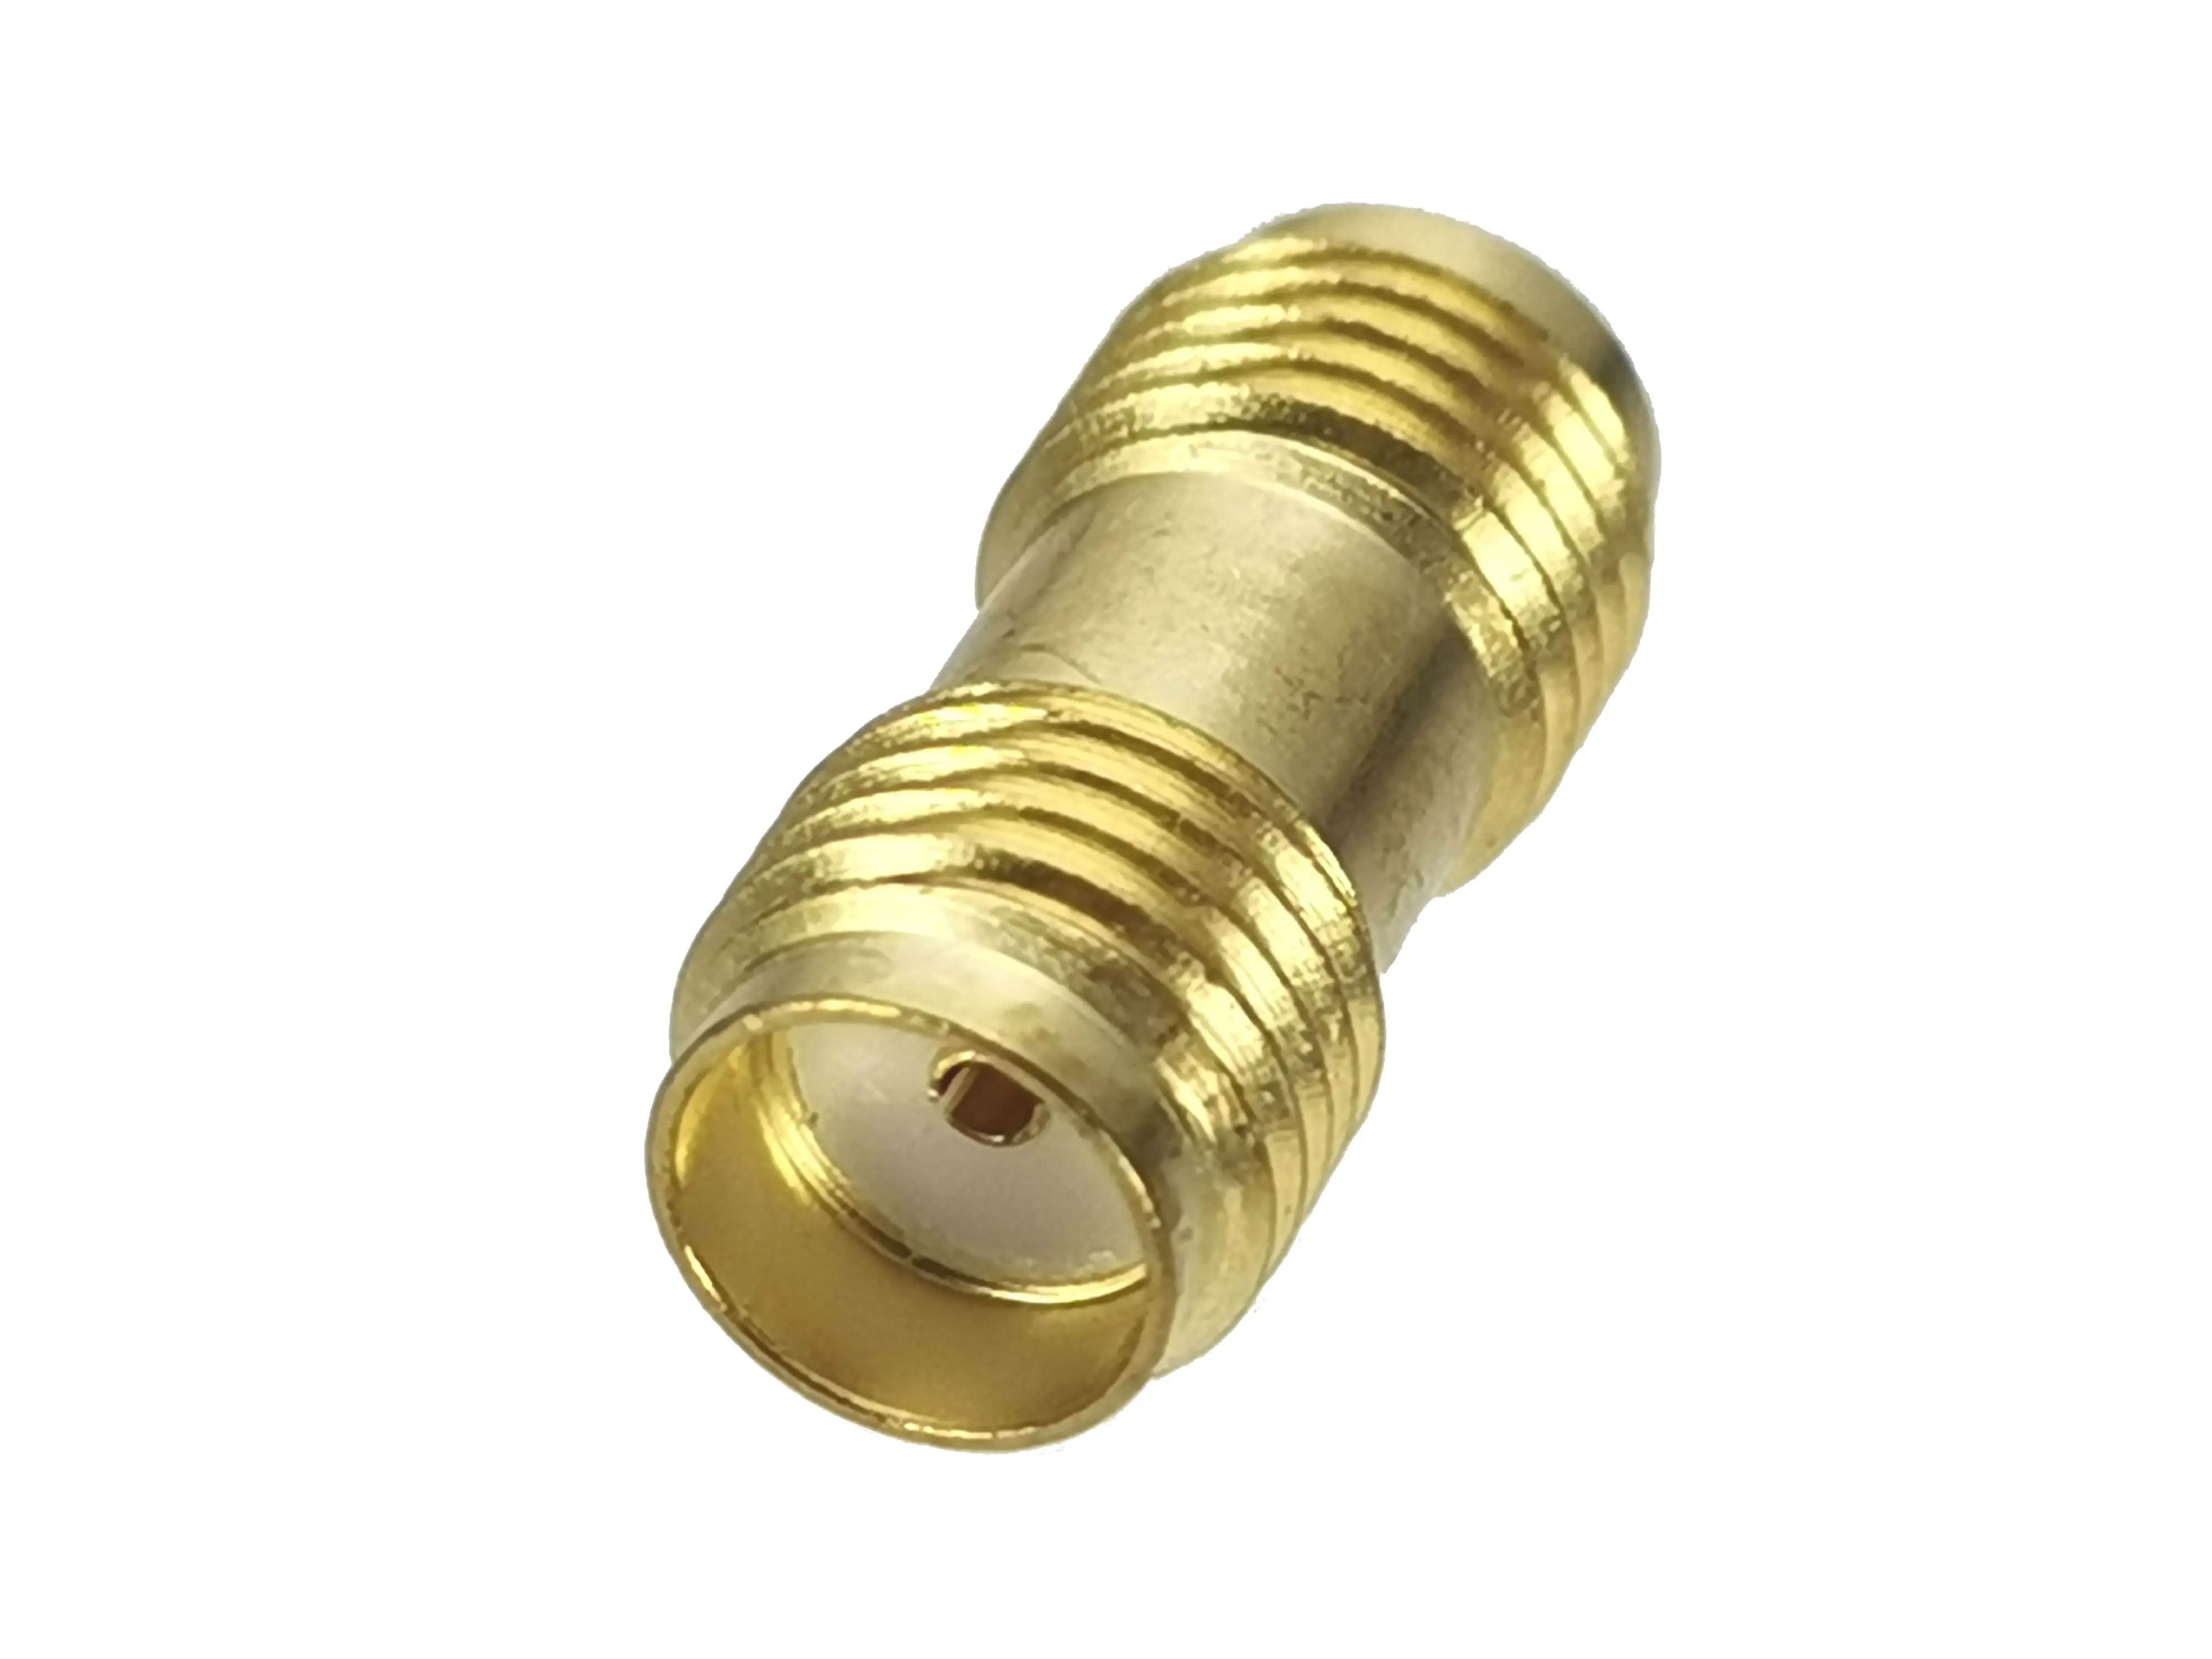 1pcs Connector Adapter SMA Female Jack to SMA Female Jack RF Coaxial Converter Straight New Brass